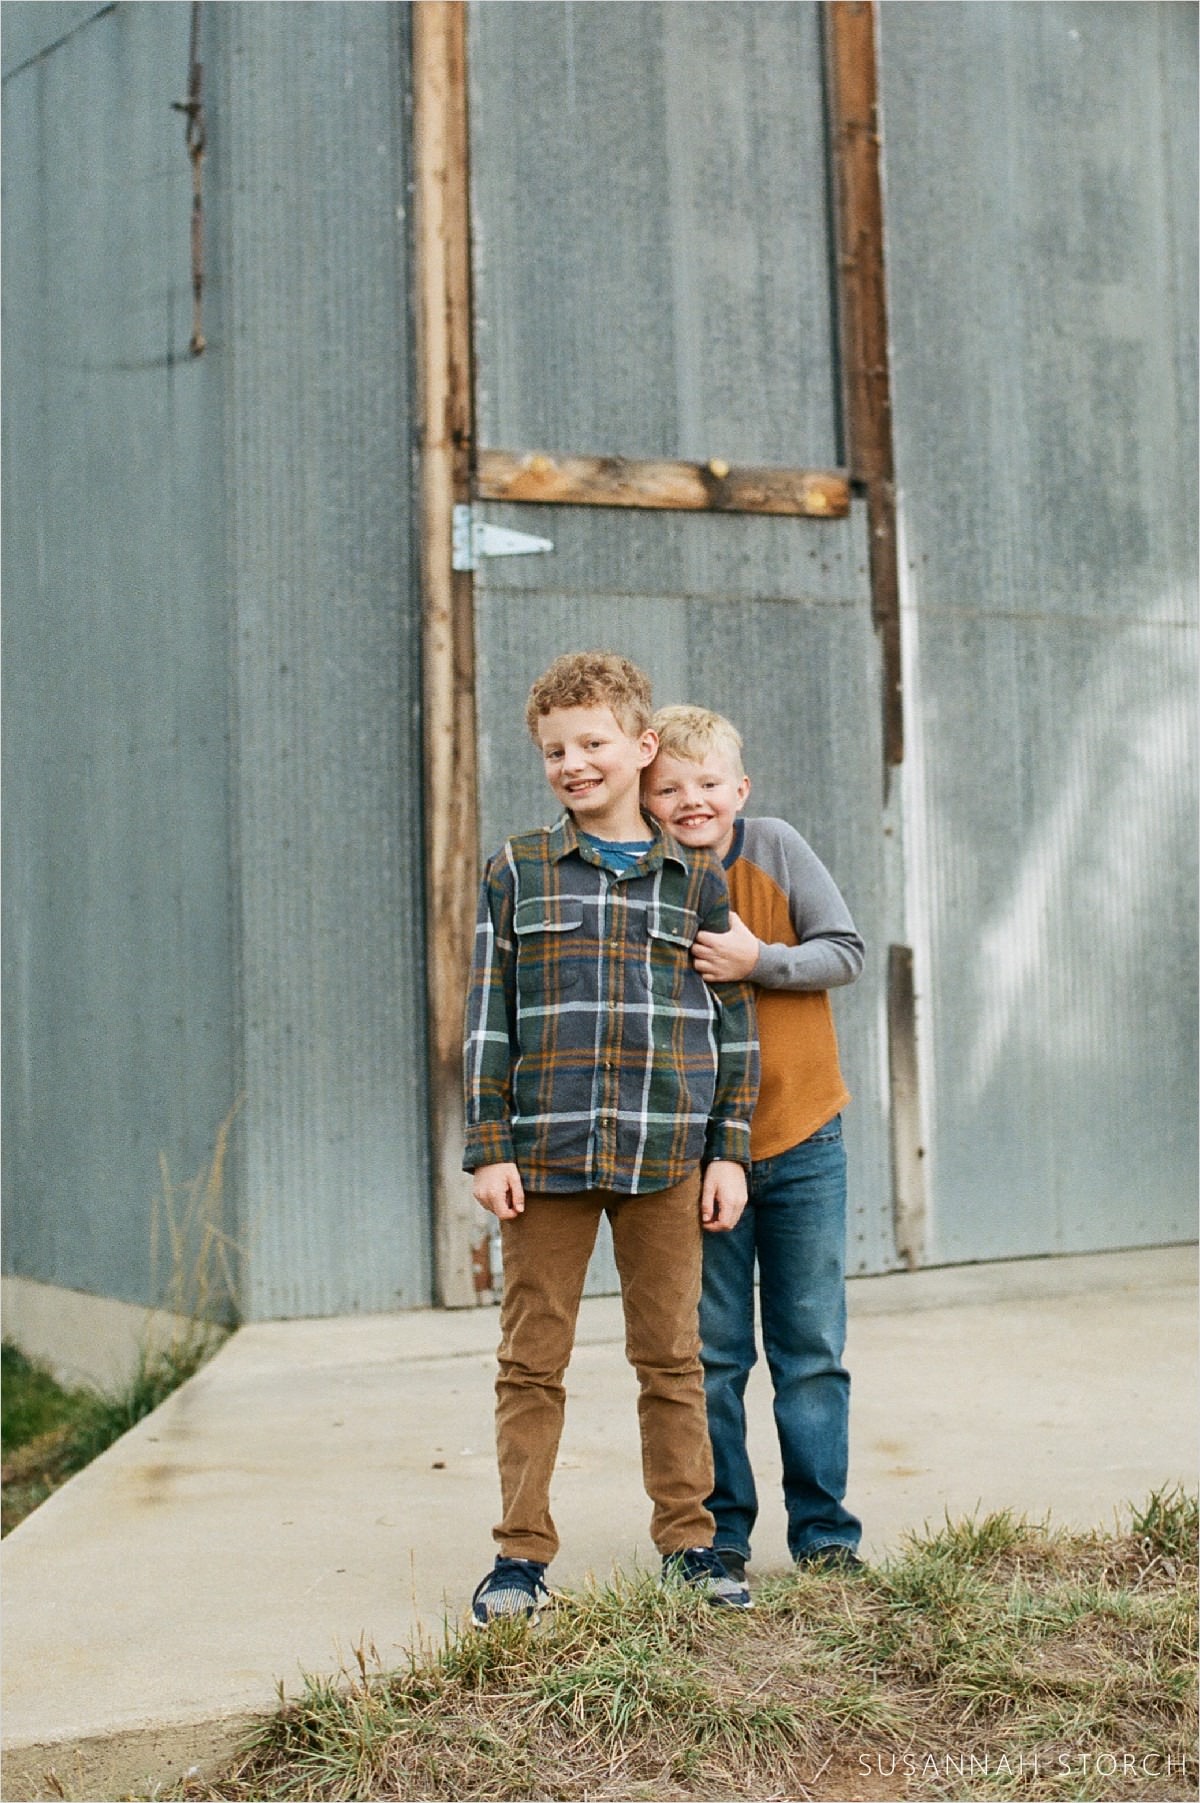 brothers hug in front of old industrial/farm building